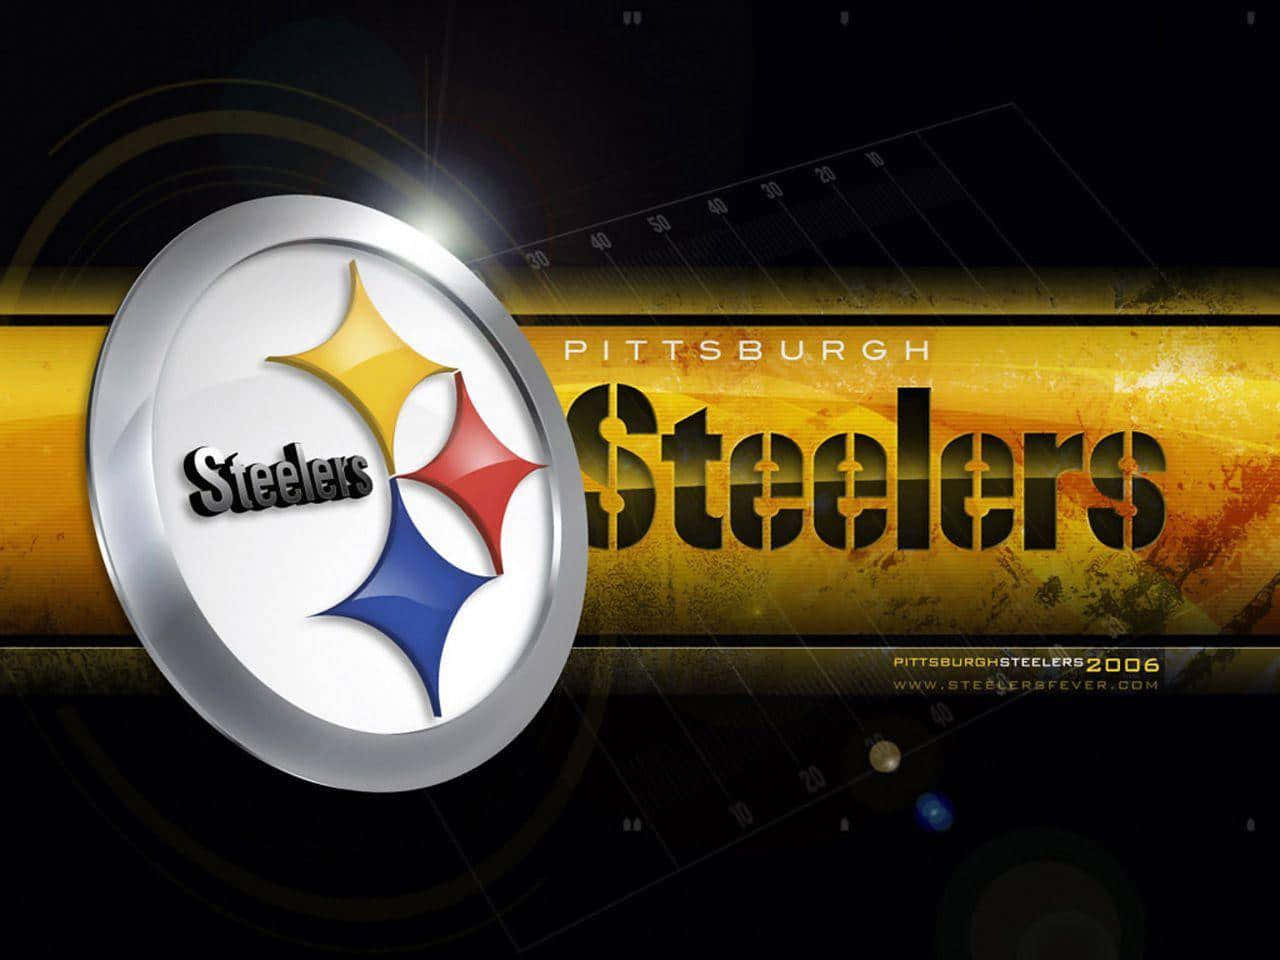 Show your team spirit with this official Pittsburgh Steelers iPhone! Wallpaper